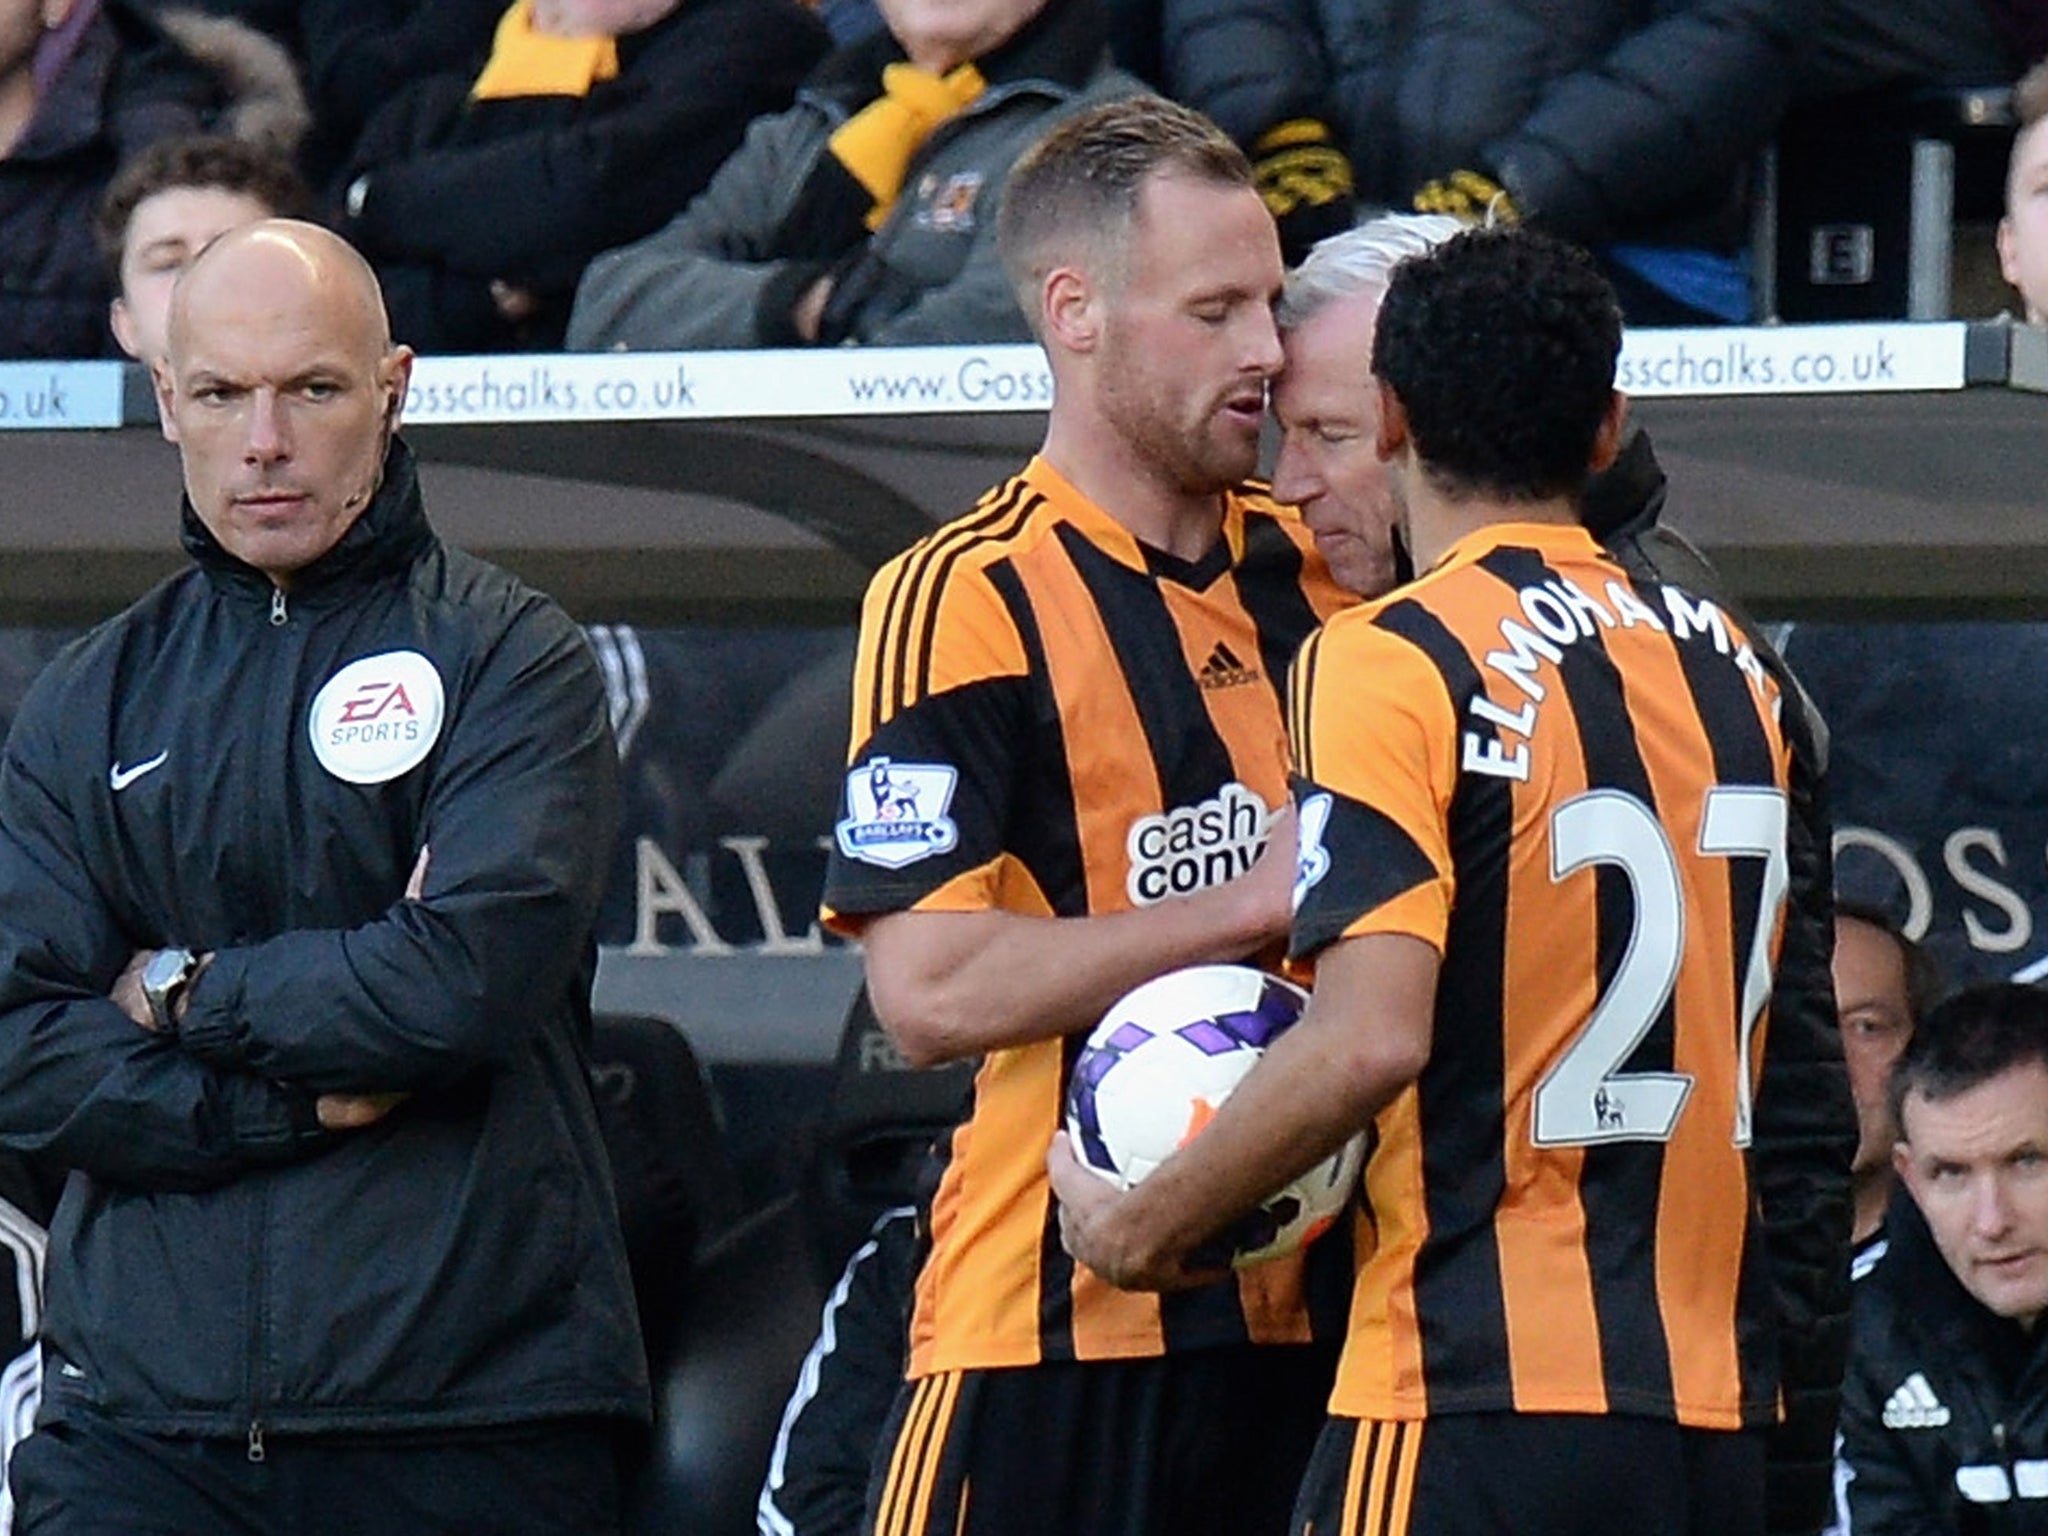 David Meyler of Hull City clashes with Alan Pardew, Manager of Newcastle United during the Barclays Premier League match between Hull City and Newcastle United